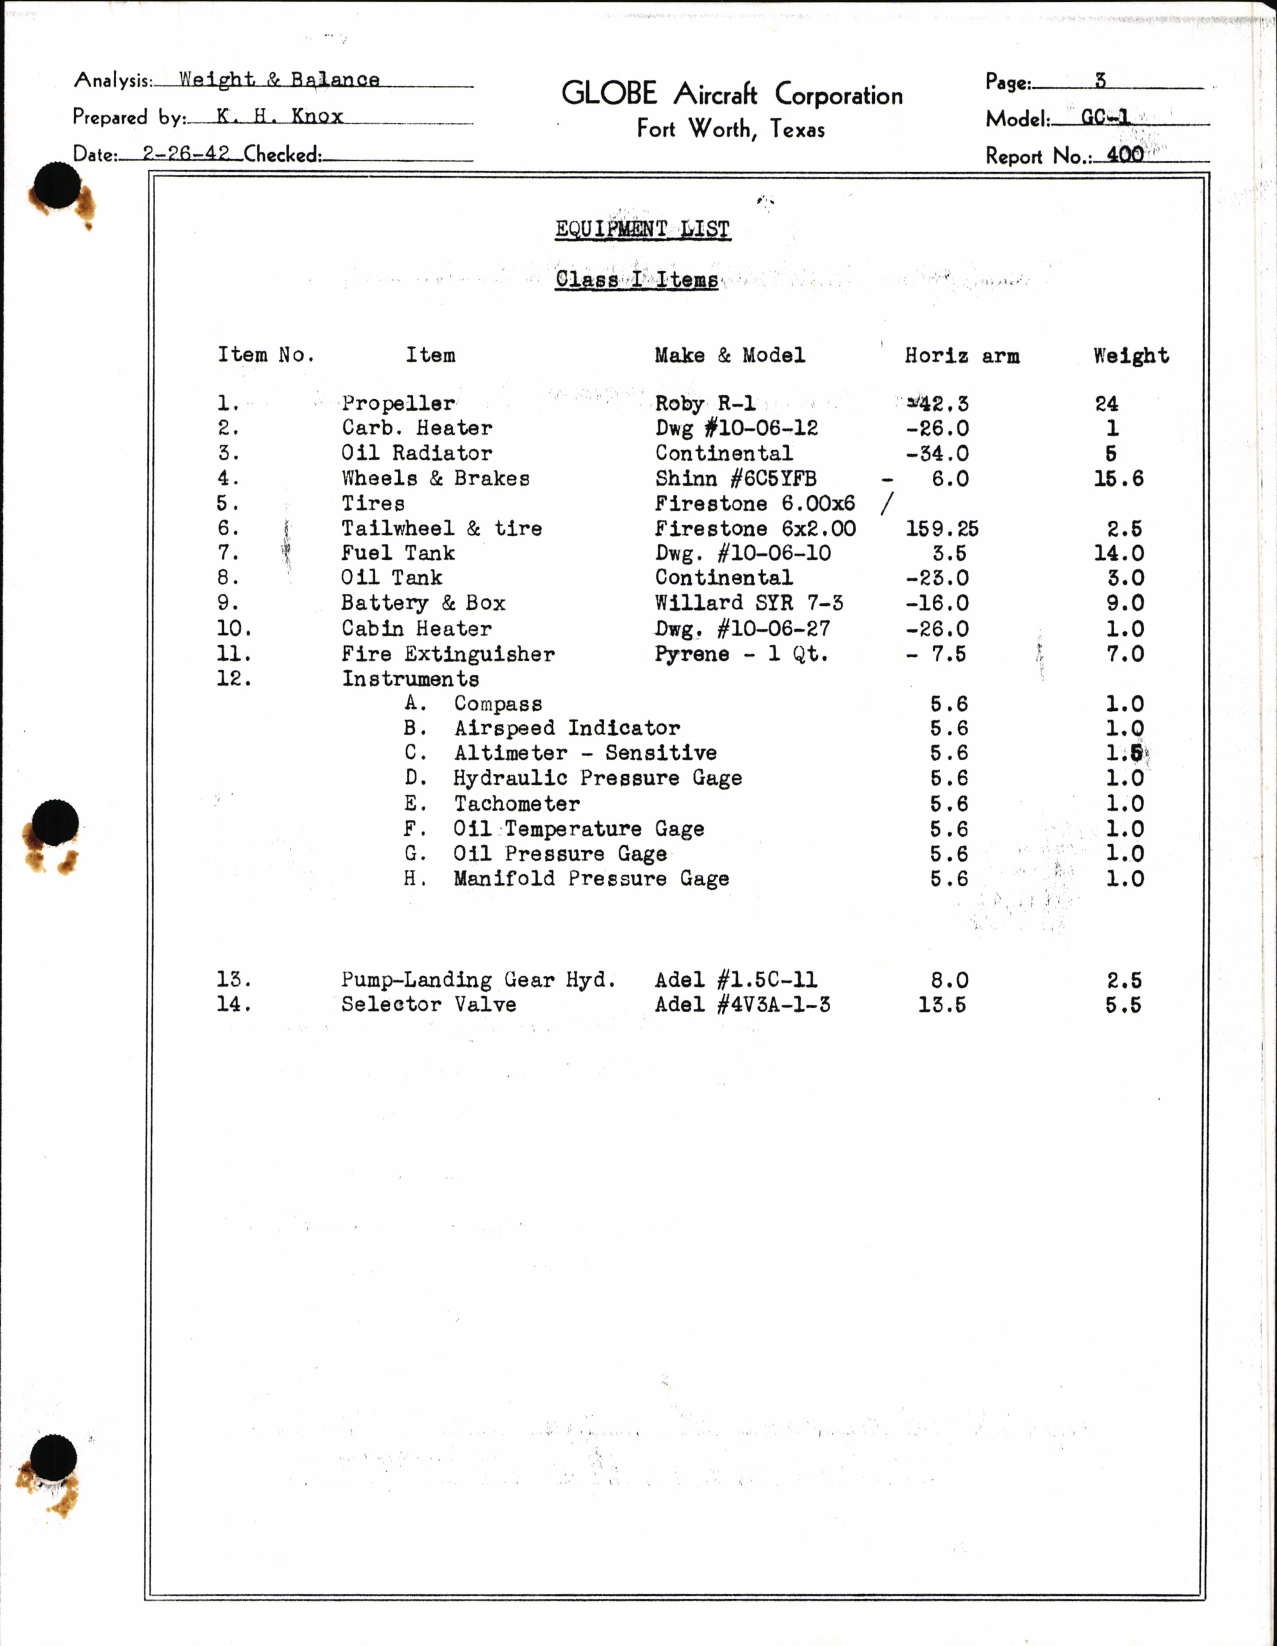 Sample page 2 from AirCorps Library document: Weight and Balance Data for Globe Model GC-1